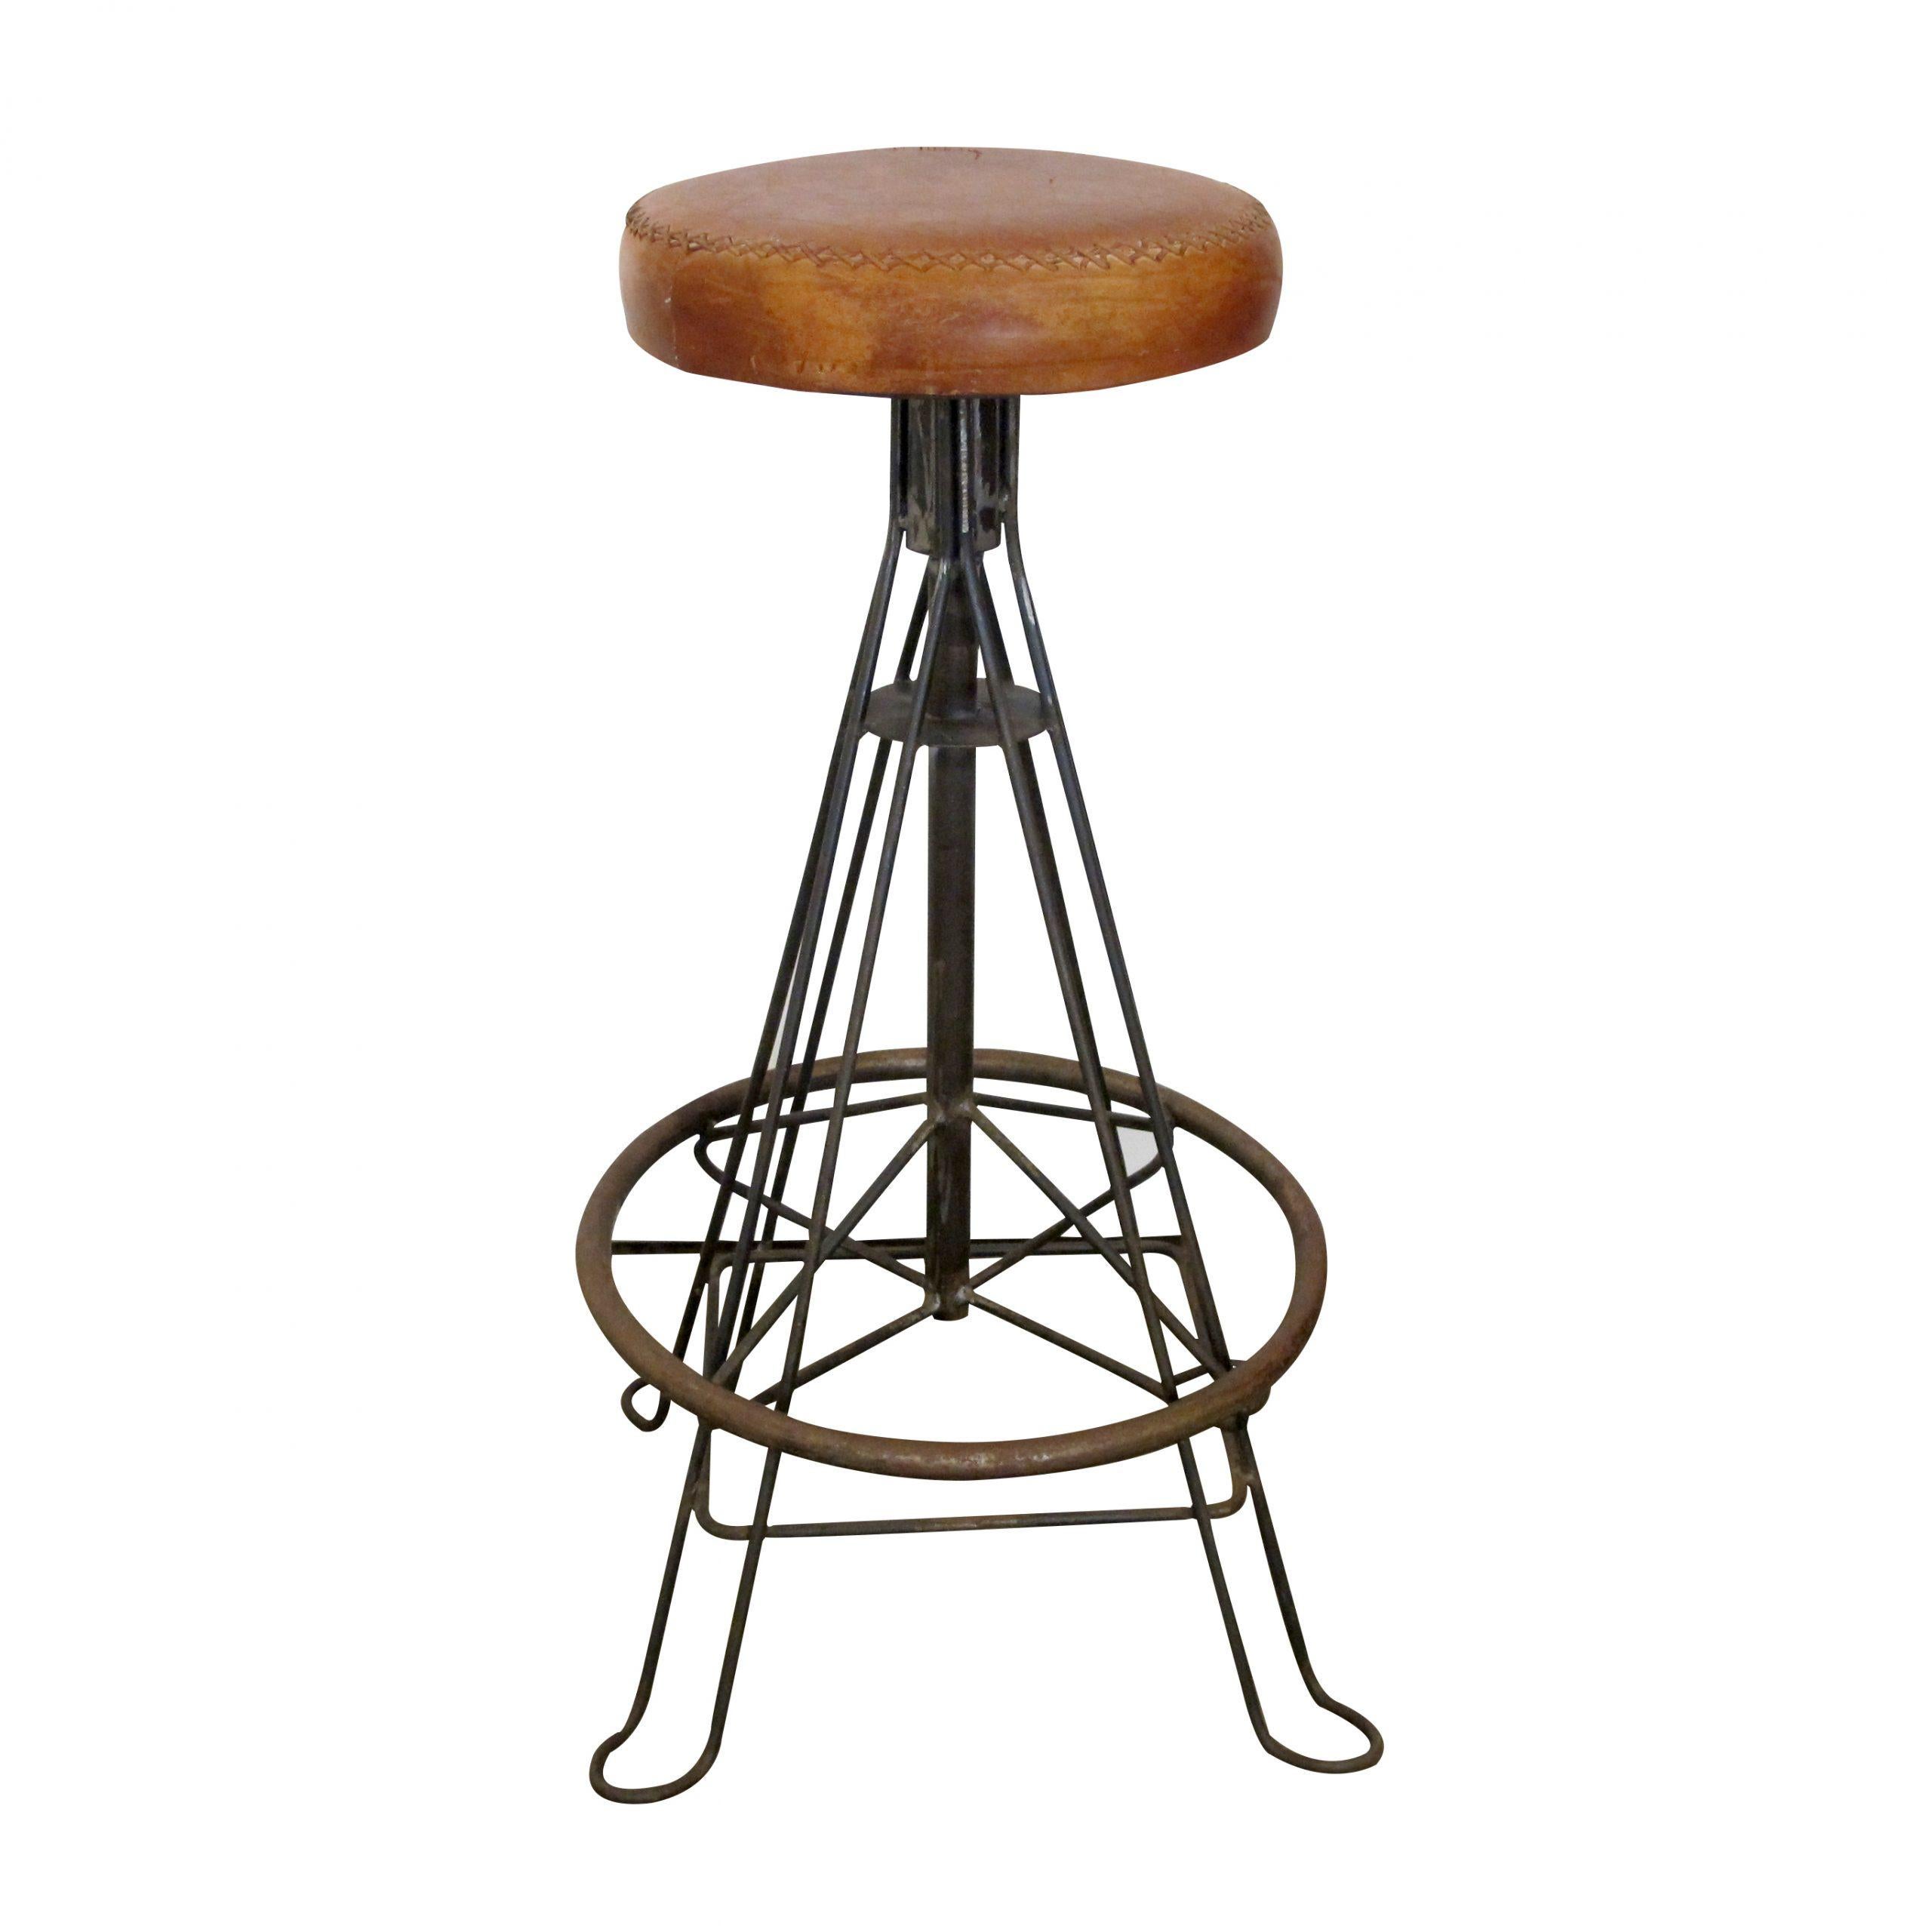 A beautiful pair of handmade wrought iron bar stools with hand-stitched leather cushions, mid-century, Spanish.  The stools are very well made and well balanced, and the wrought iron has a rustic patinated finish.

Size: H76 cm x Diameter 40 cm